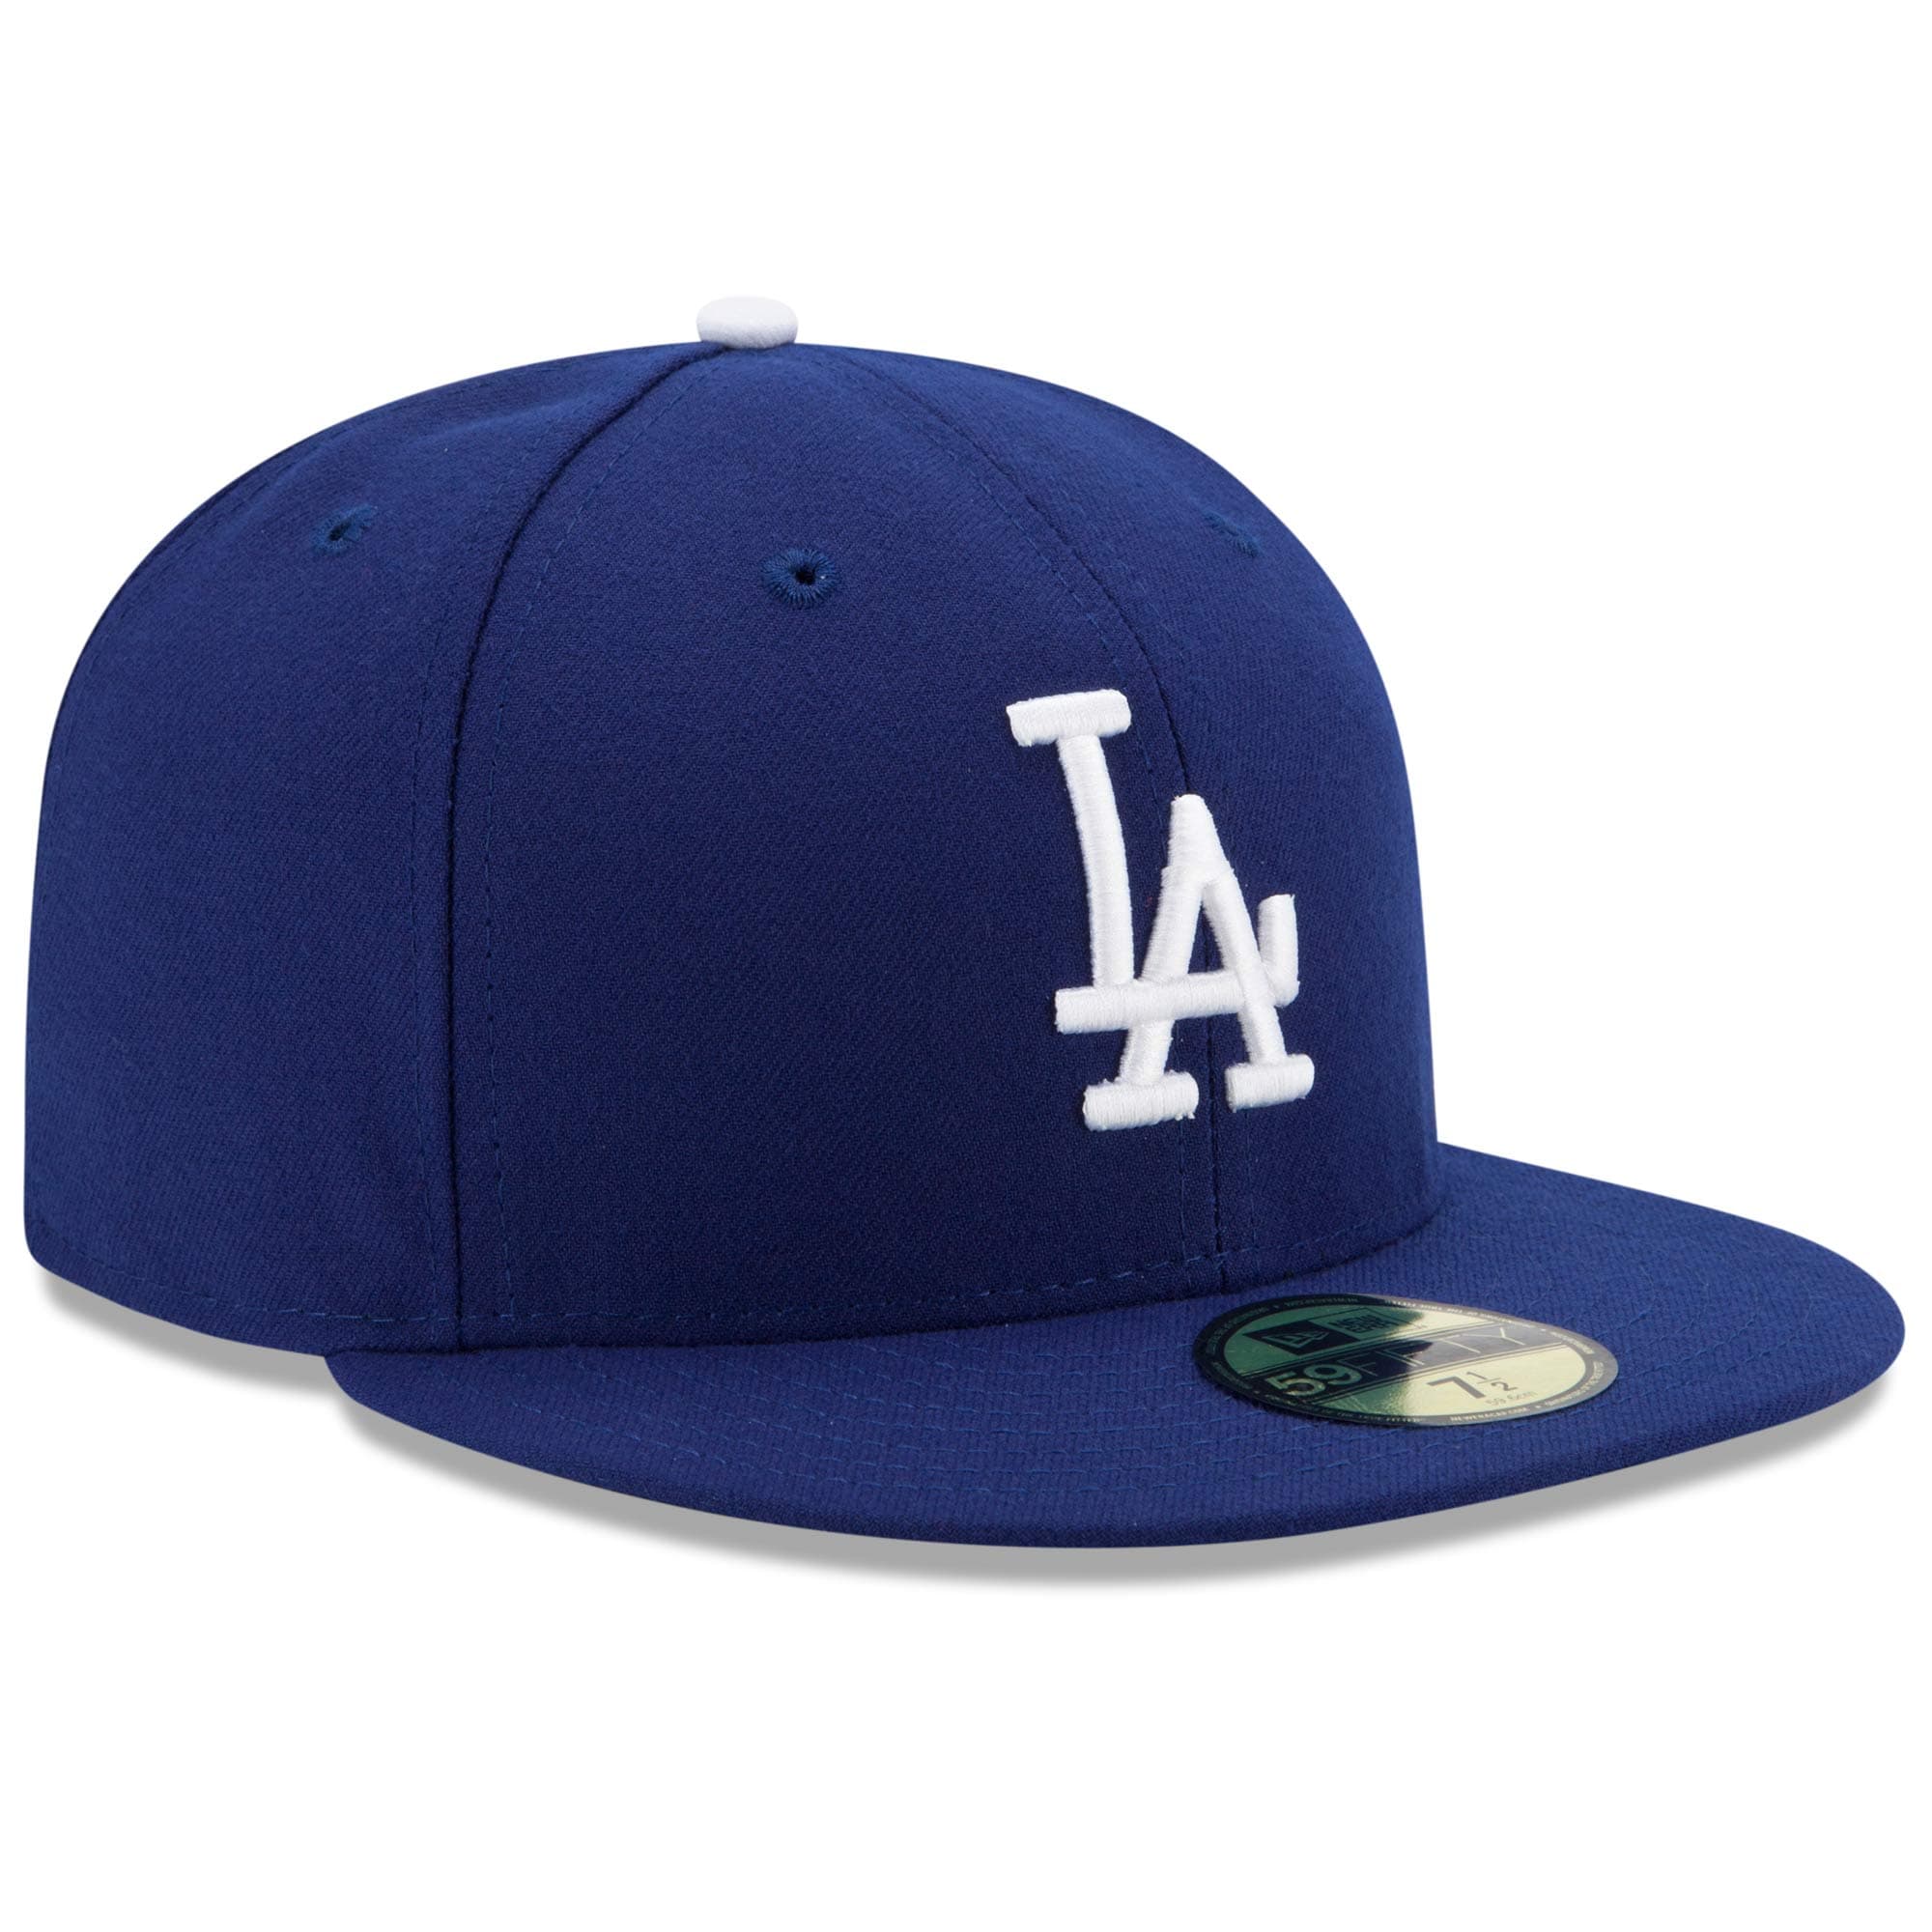 Men's New Era Royal Los Angeles Dodgers Authentic Collection On Field 59FIFTY Performance Fitted Hat - image 3 of 5